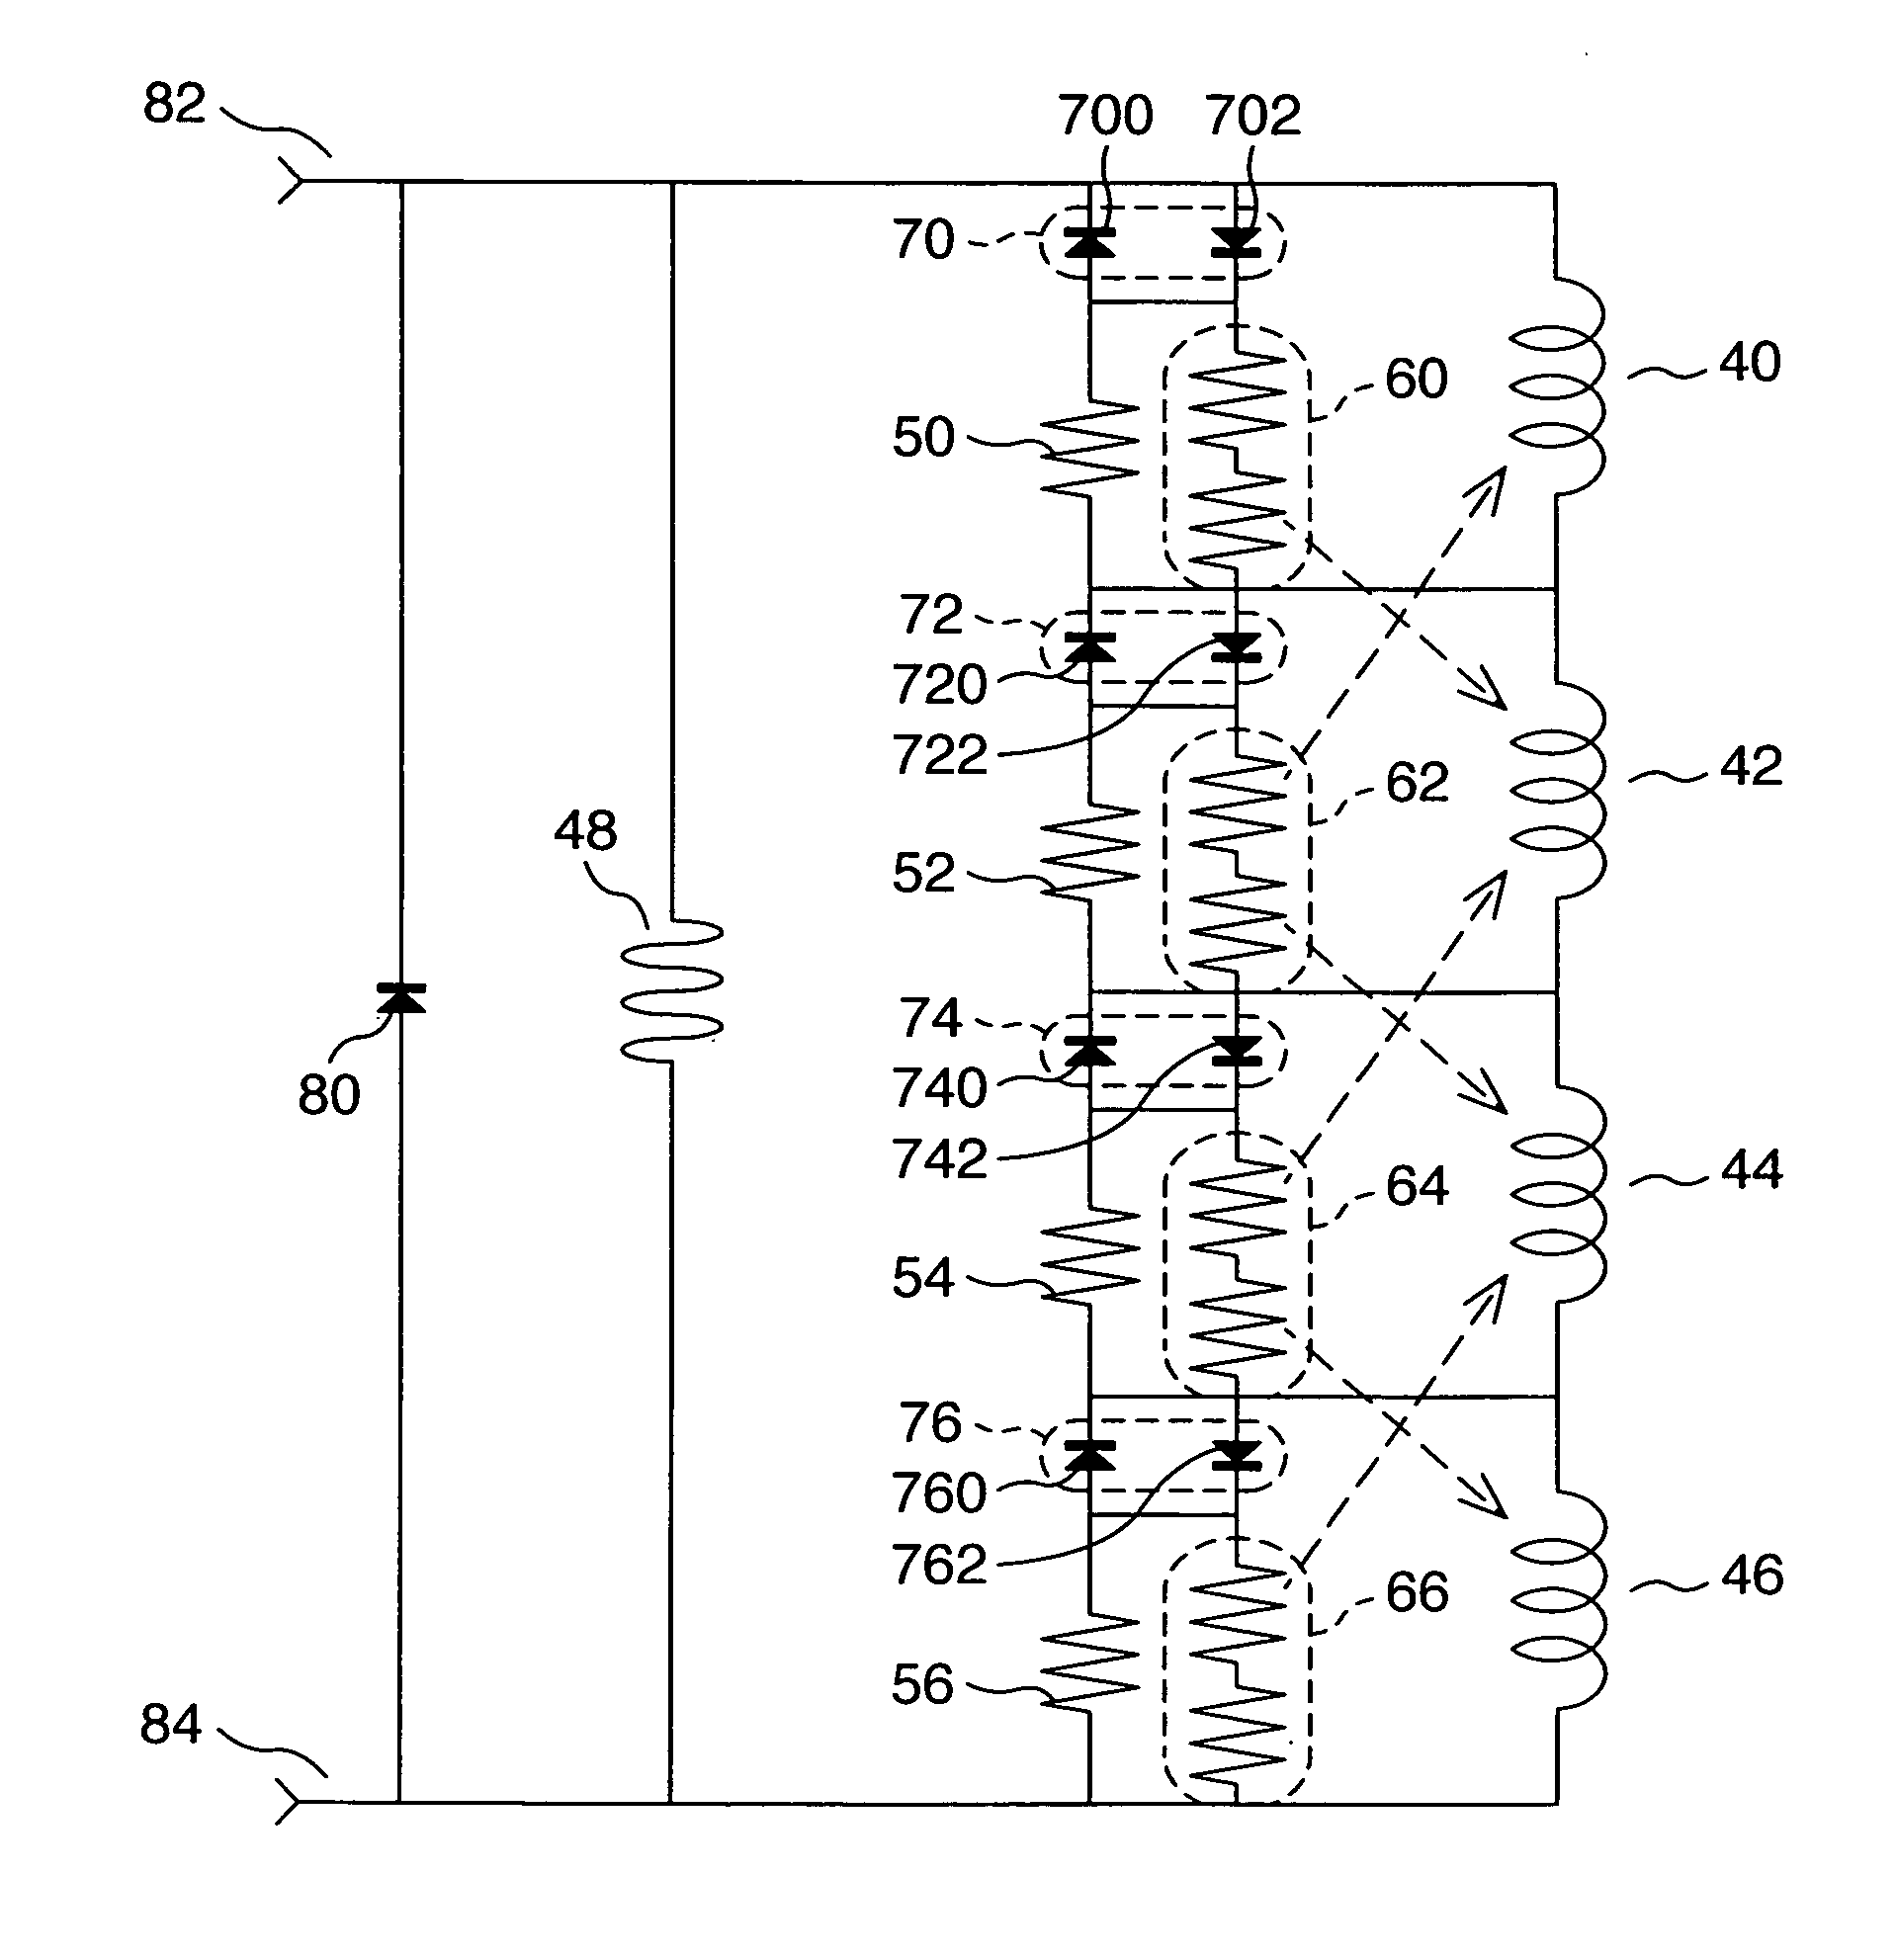 Superconducting magnet system with quench protection circuit